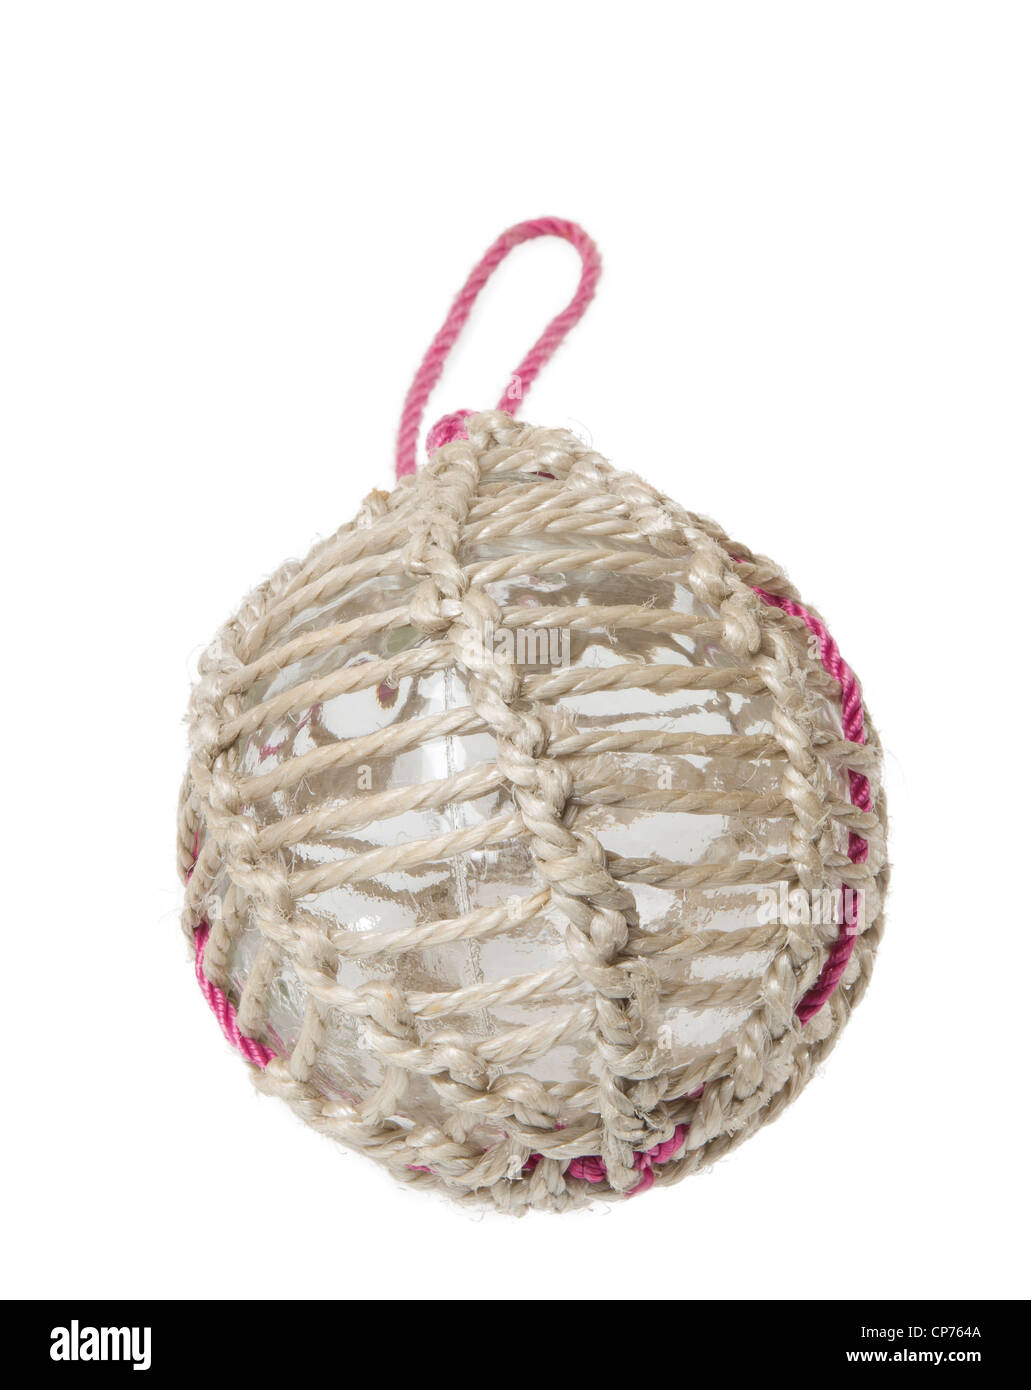 Glass fishing net round buoy. One glass sphere with ropes isolated